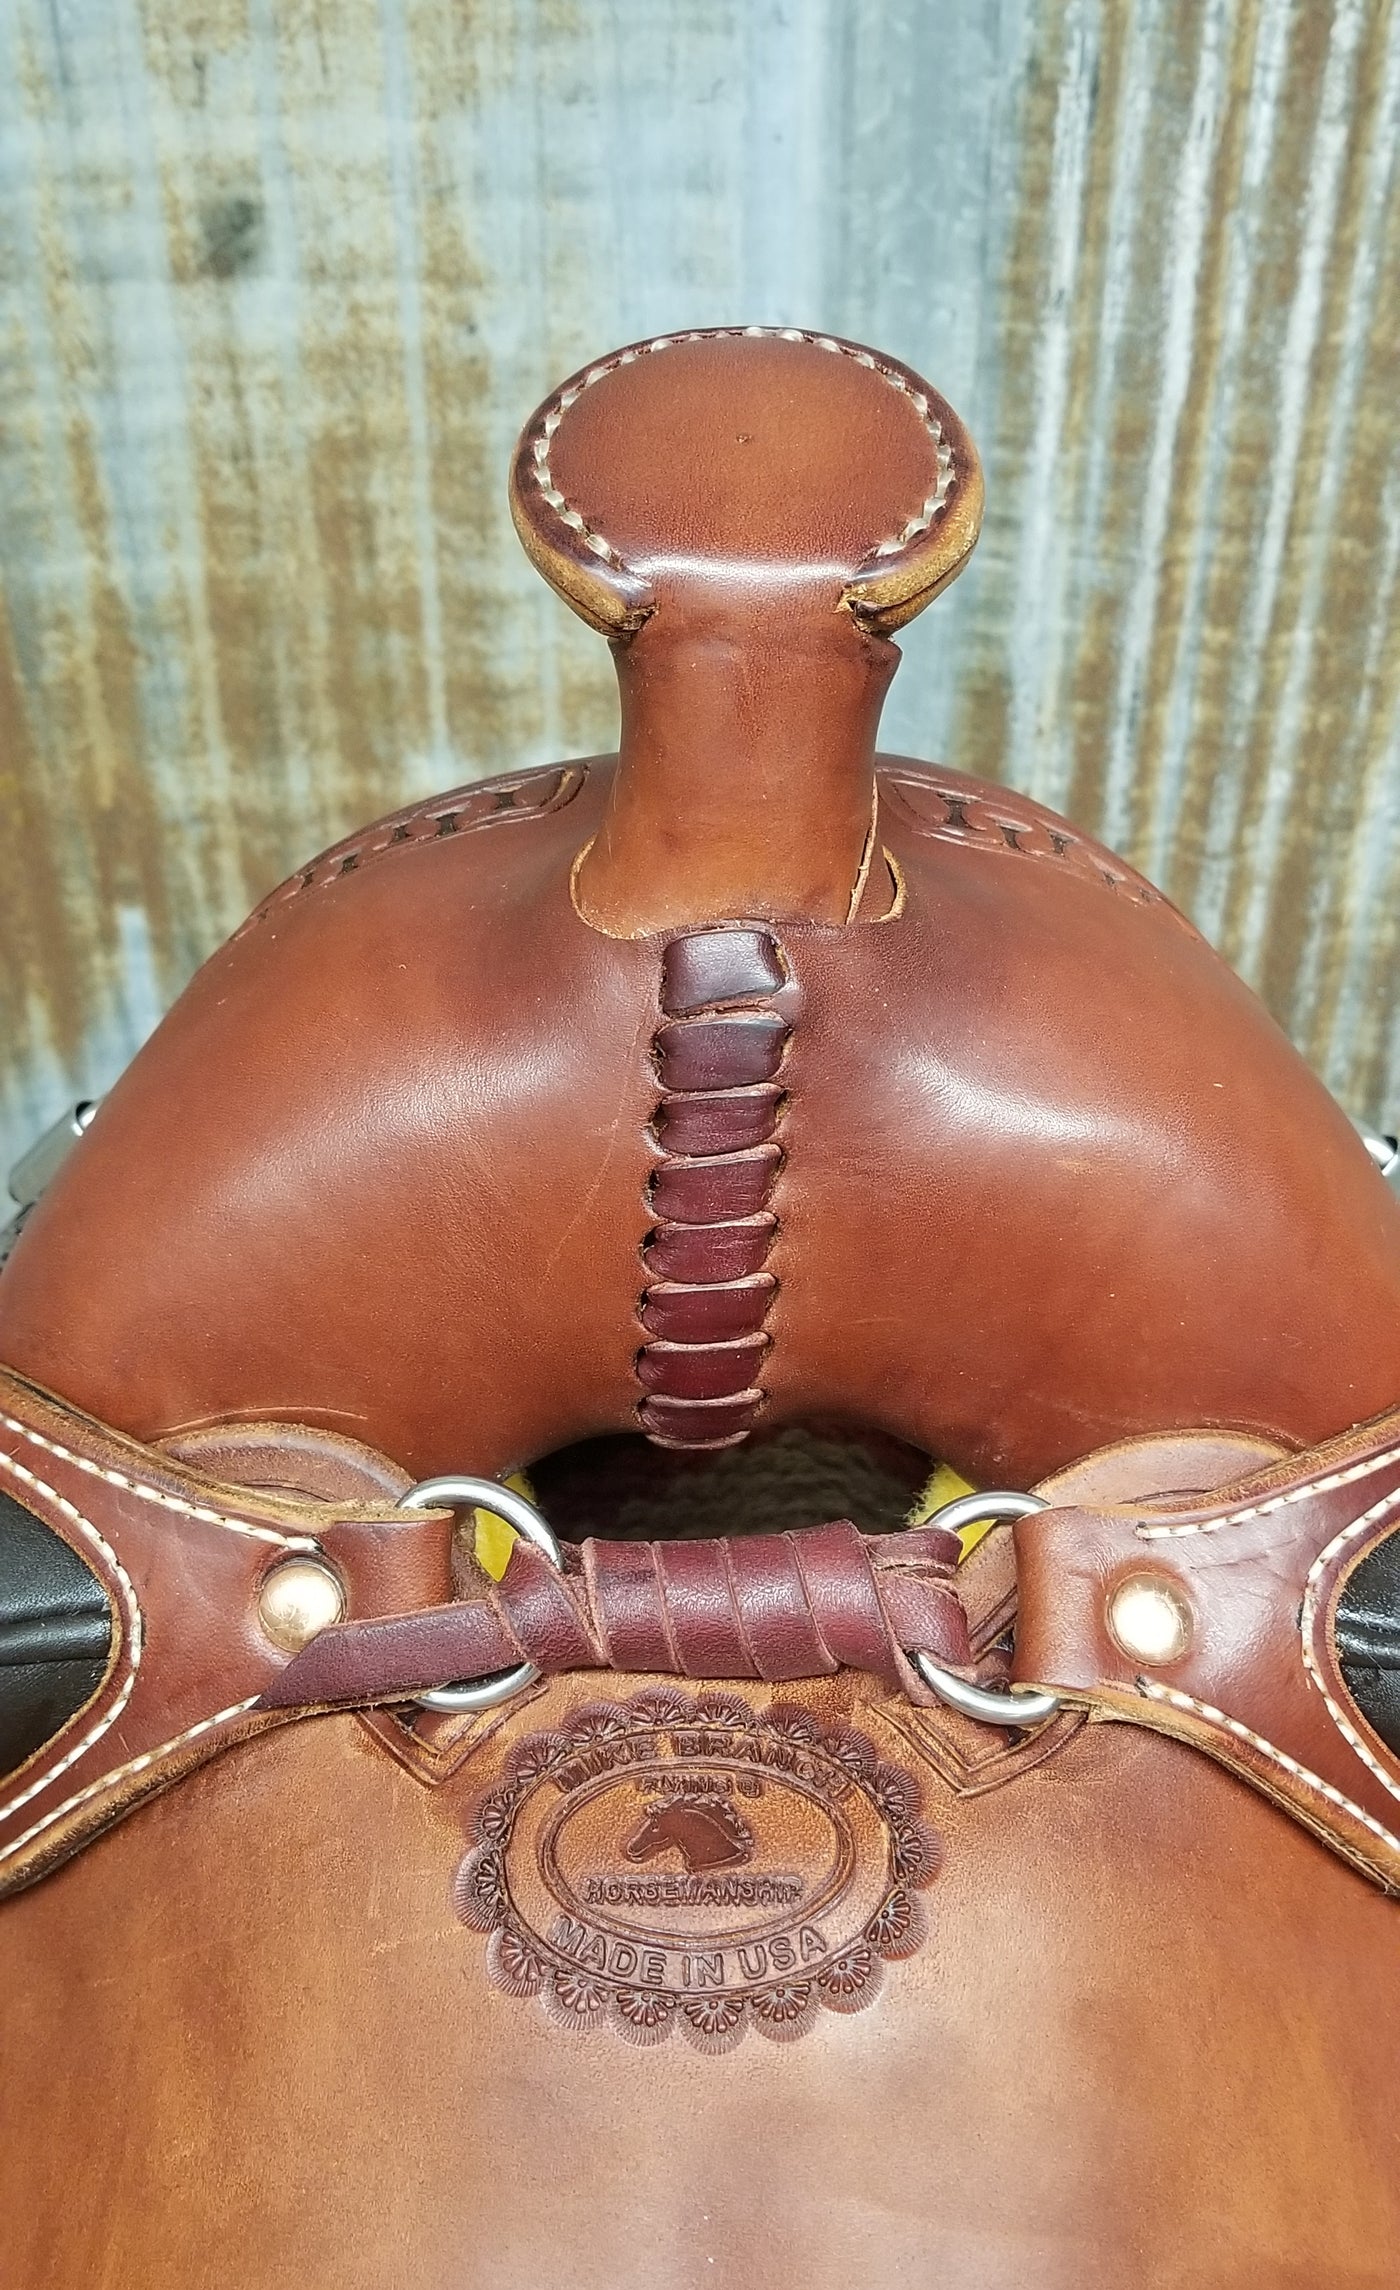 RW Bowman Mike Branch Natural Ride Saddle - West 20 Saddle Co.